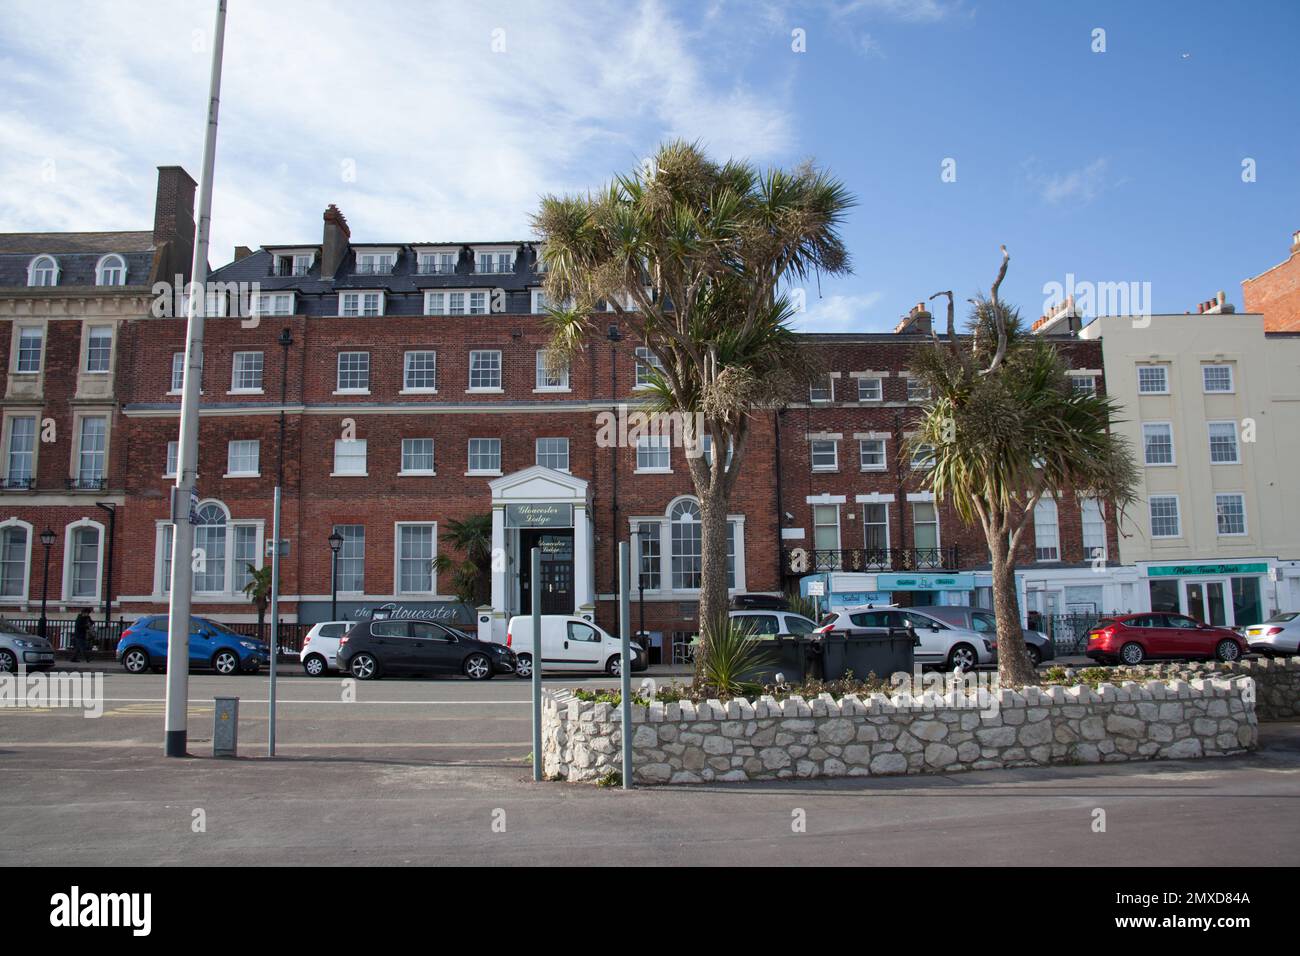 B and B's on the seafront in Weymouth, Dorset in the UK Stock Photo